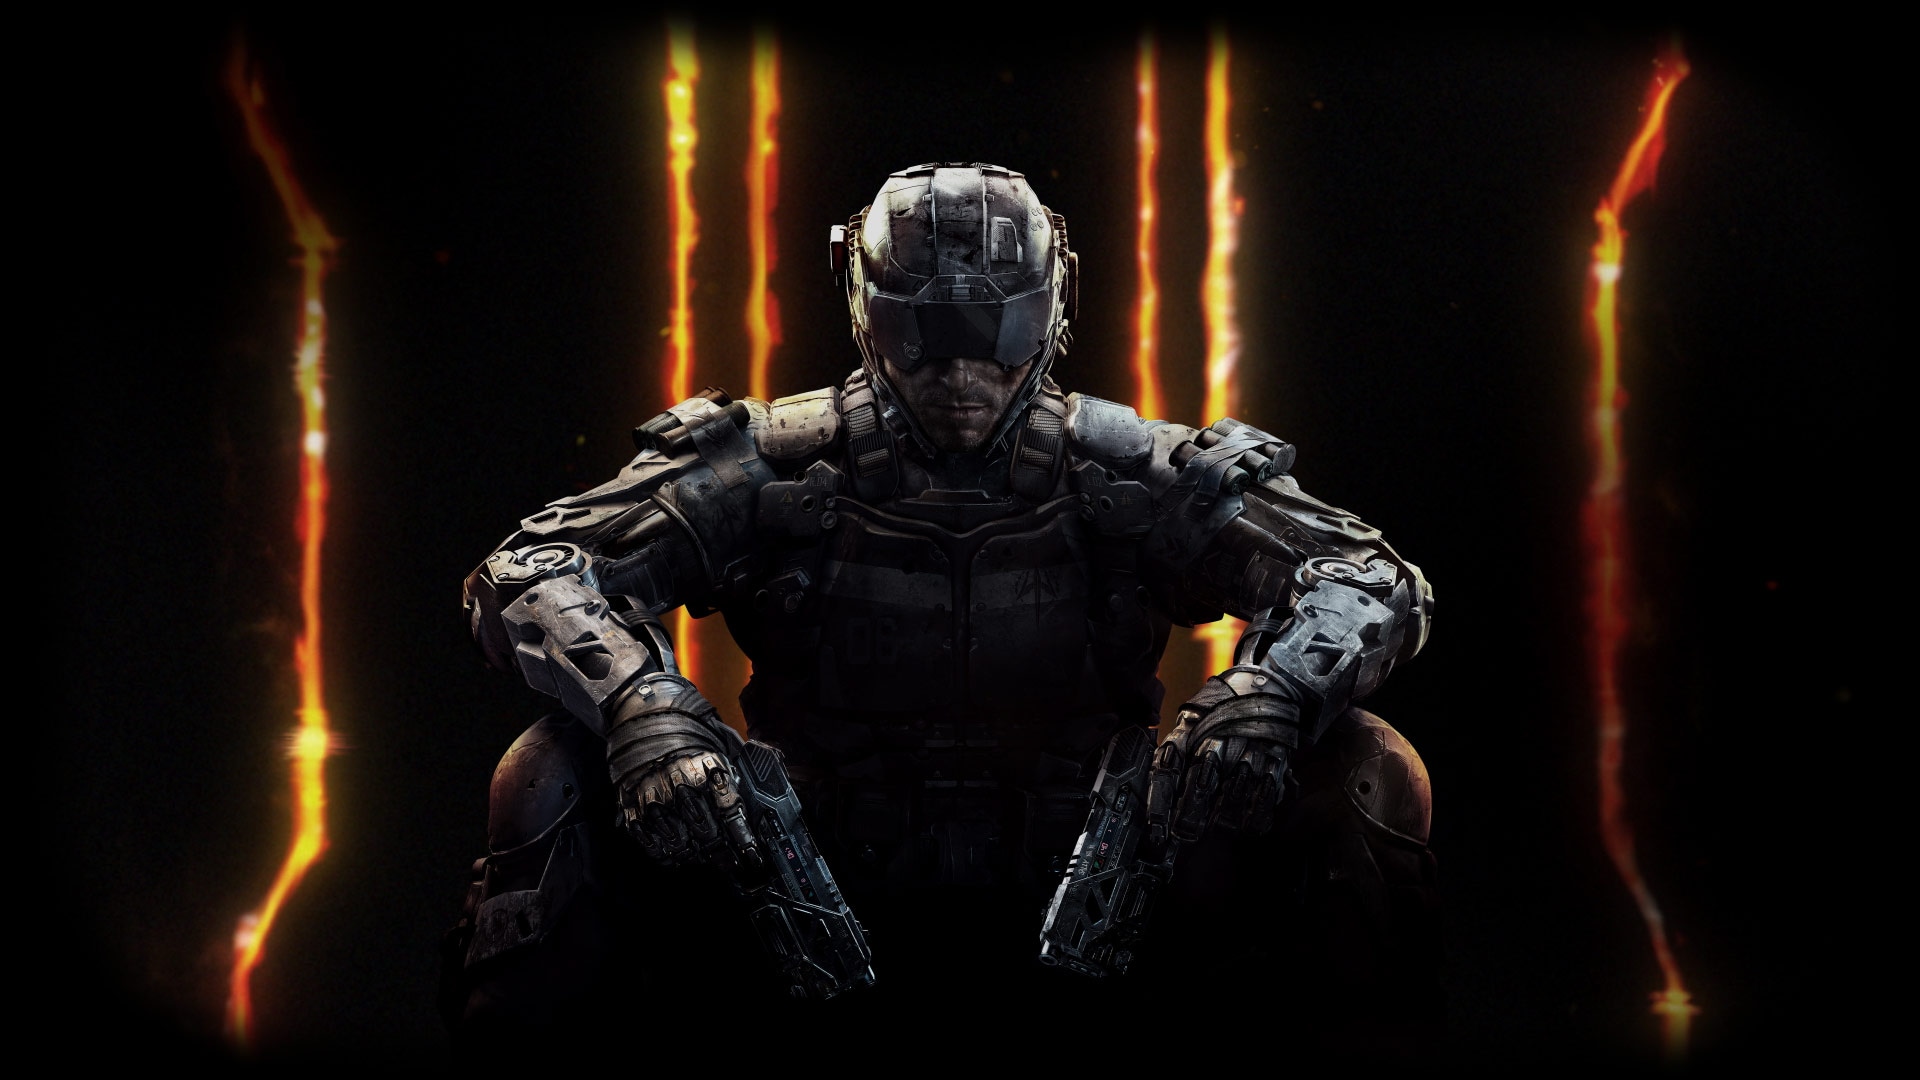 Of Duty Black Ops III HD Wallpapers Backgrounds Wallpaper Abyss 1920x1080